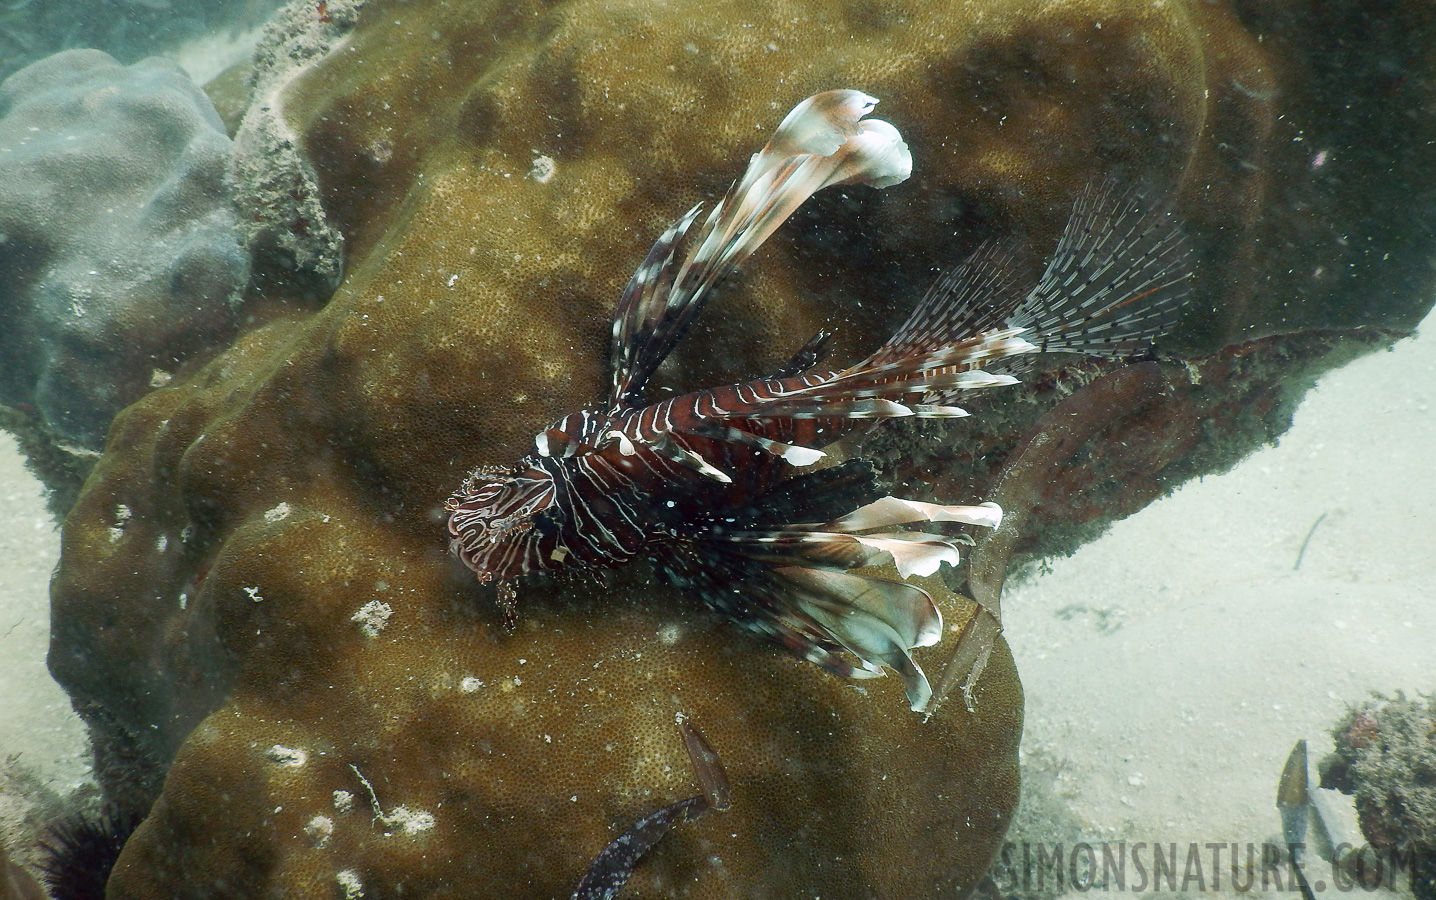 Pterois miles [7.7 mm, 1/125 sec at f / 4.0, ISO 125]